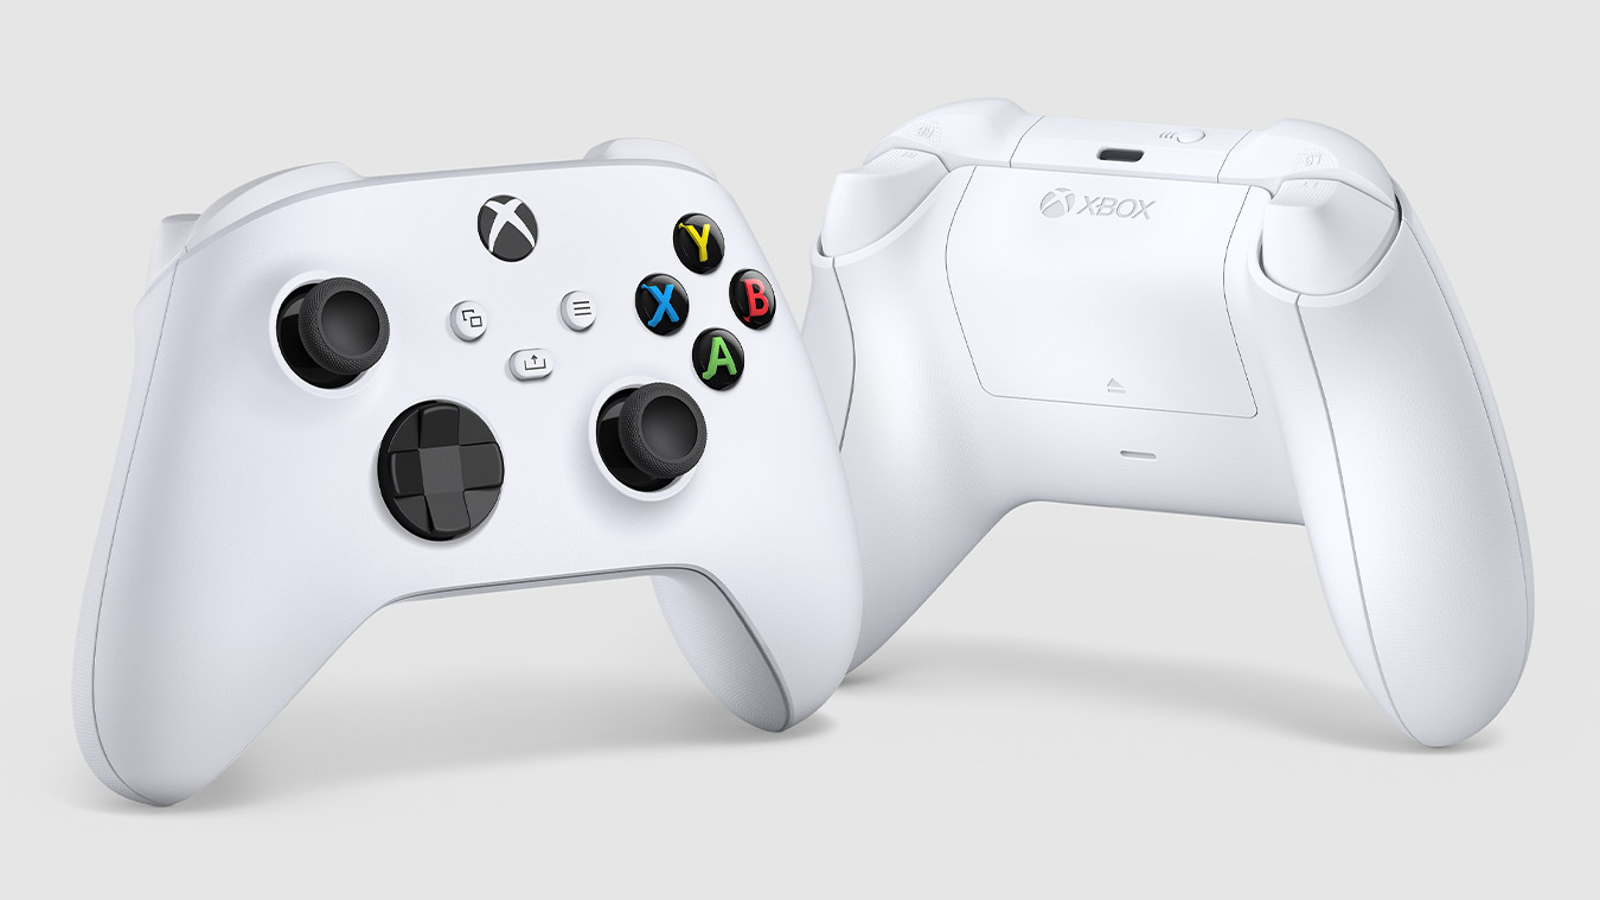 Games/Apps: Xbox One S + extra controller & $30 GC $250, PS4 Slim w/ $50 GC  $250, Watch Dogs 2 $35, freebies, more